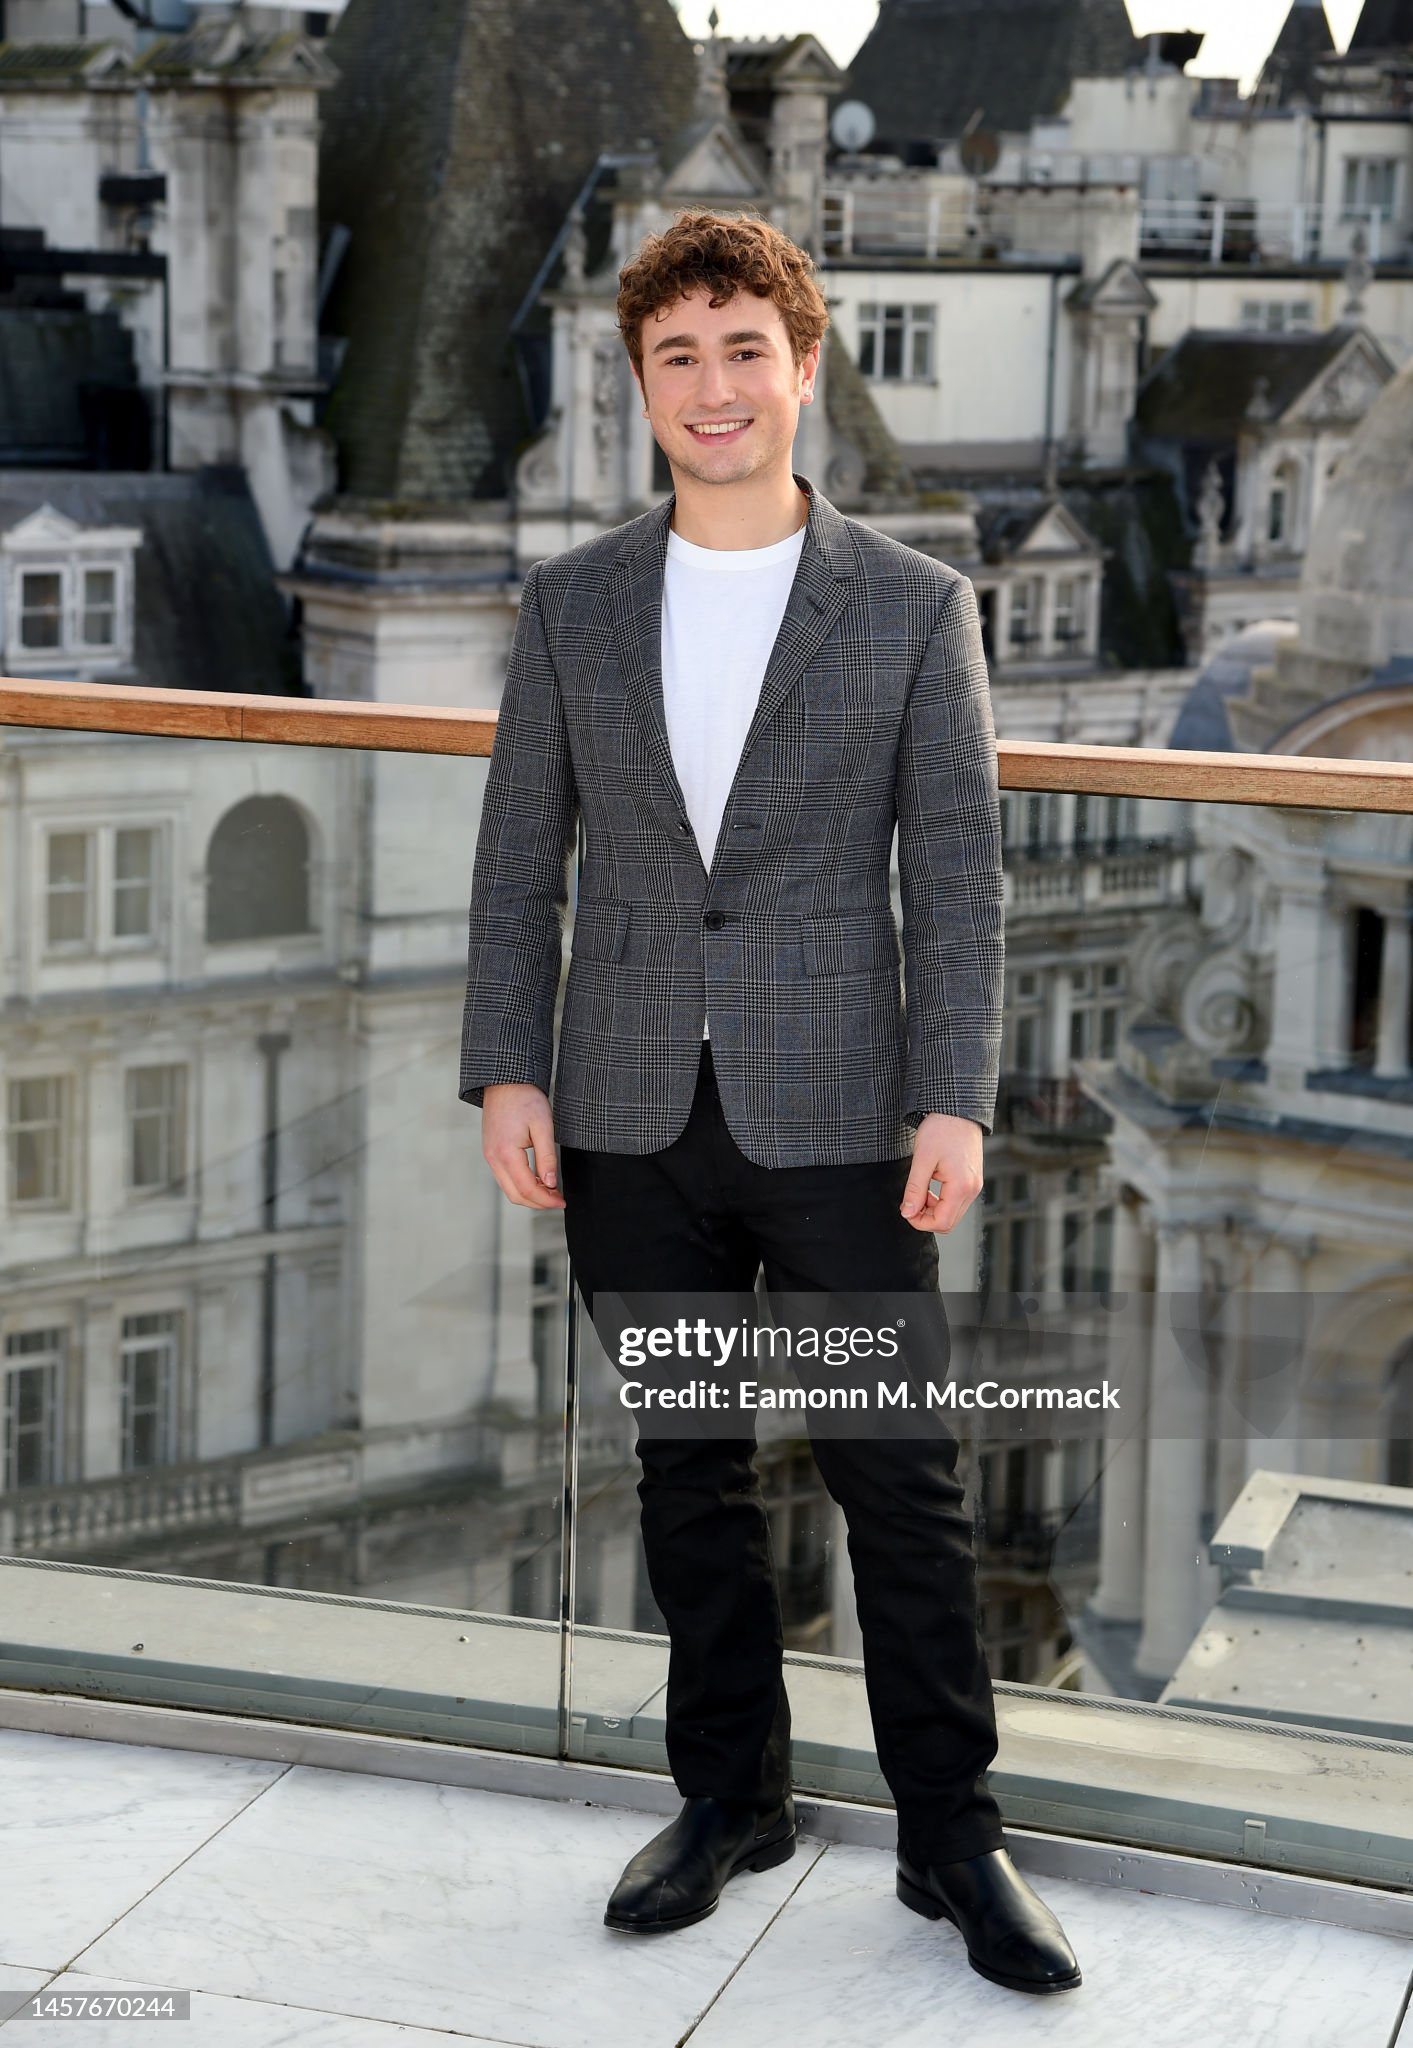 ¿Cuánto mide Gabriel LaBelle? - Altura - Real height Gabriel-labelle-attends-the-fabelmans-photocall-on-january-19-2023-in-london-england